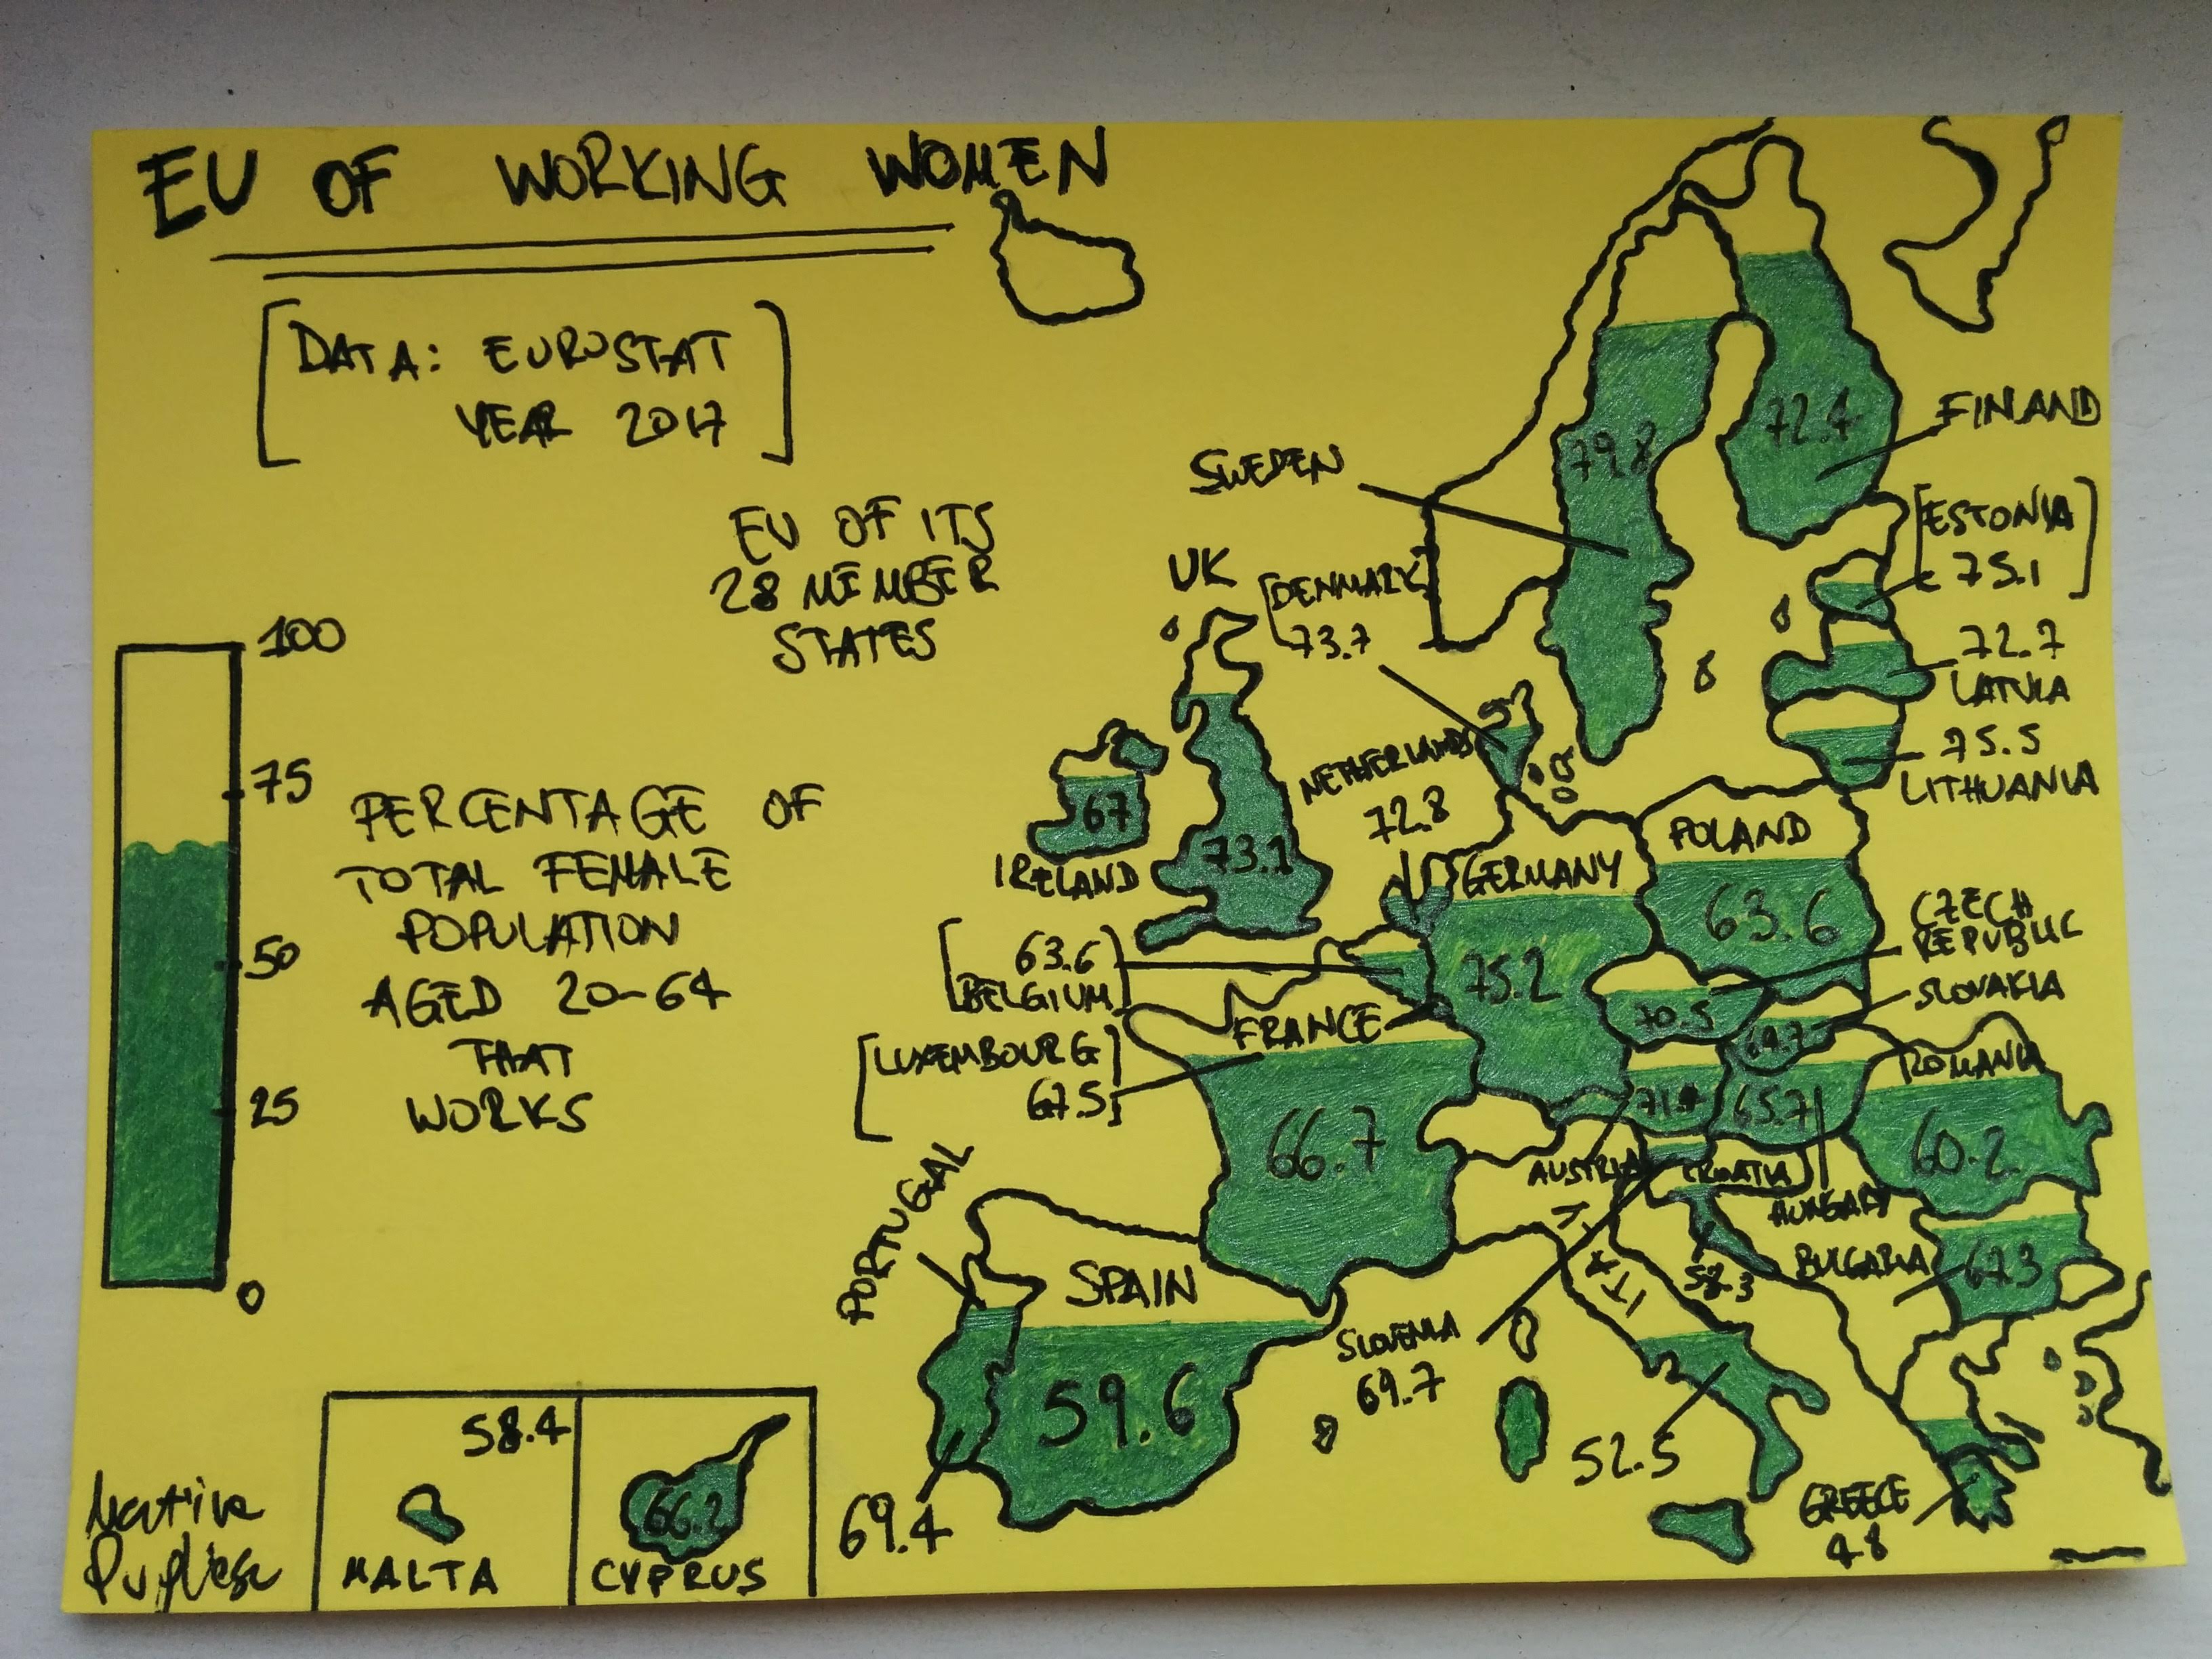 A hand-drawn map of the EU (2017) where each country is coloured based on the percentage of women that work. It shows that northern countries fare around 70% while sountern Europe is between 50-60%.